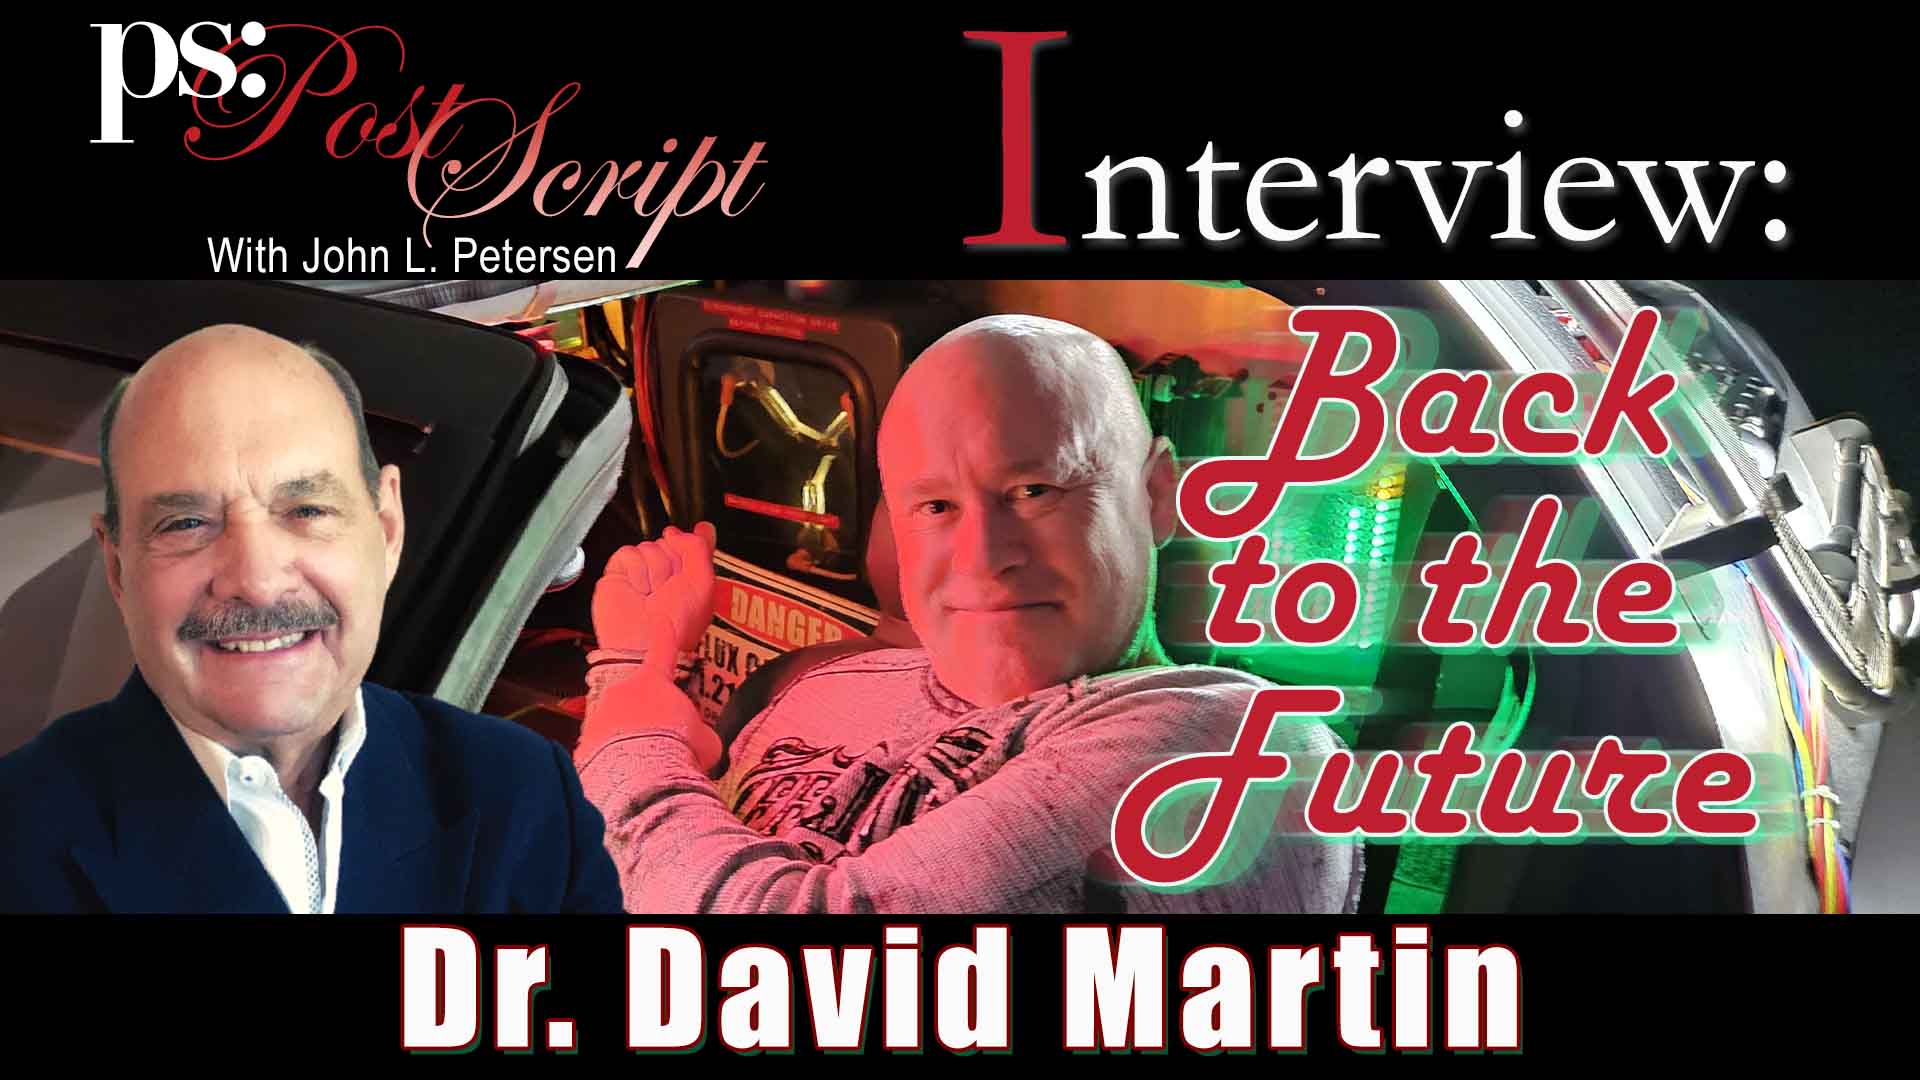 Dr. David Martin, Interview, Back to the Future